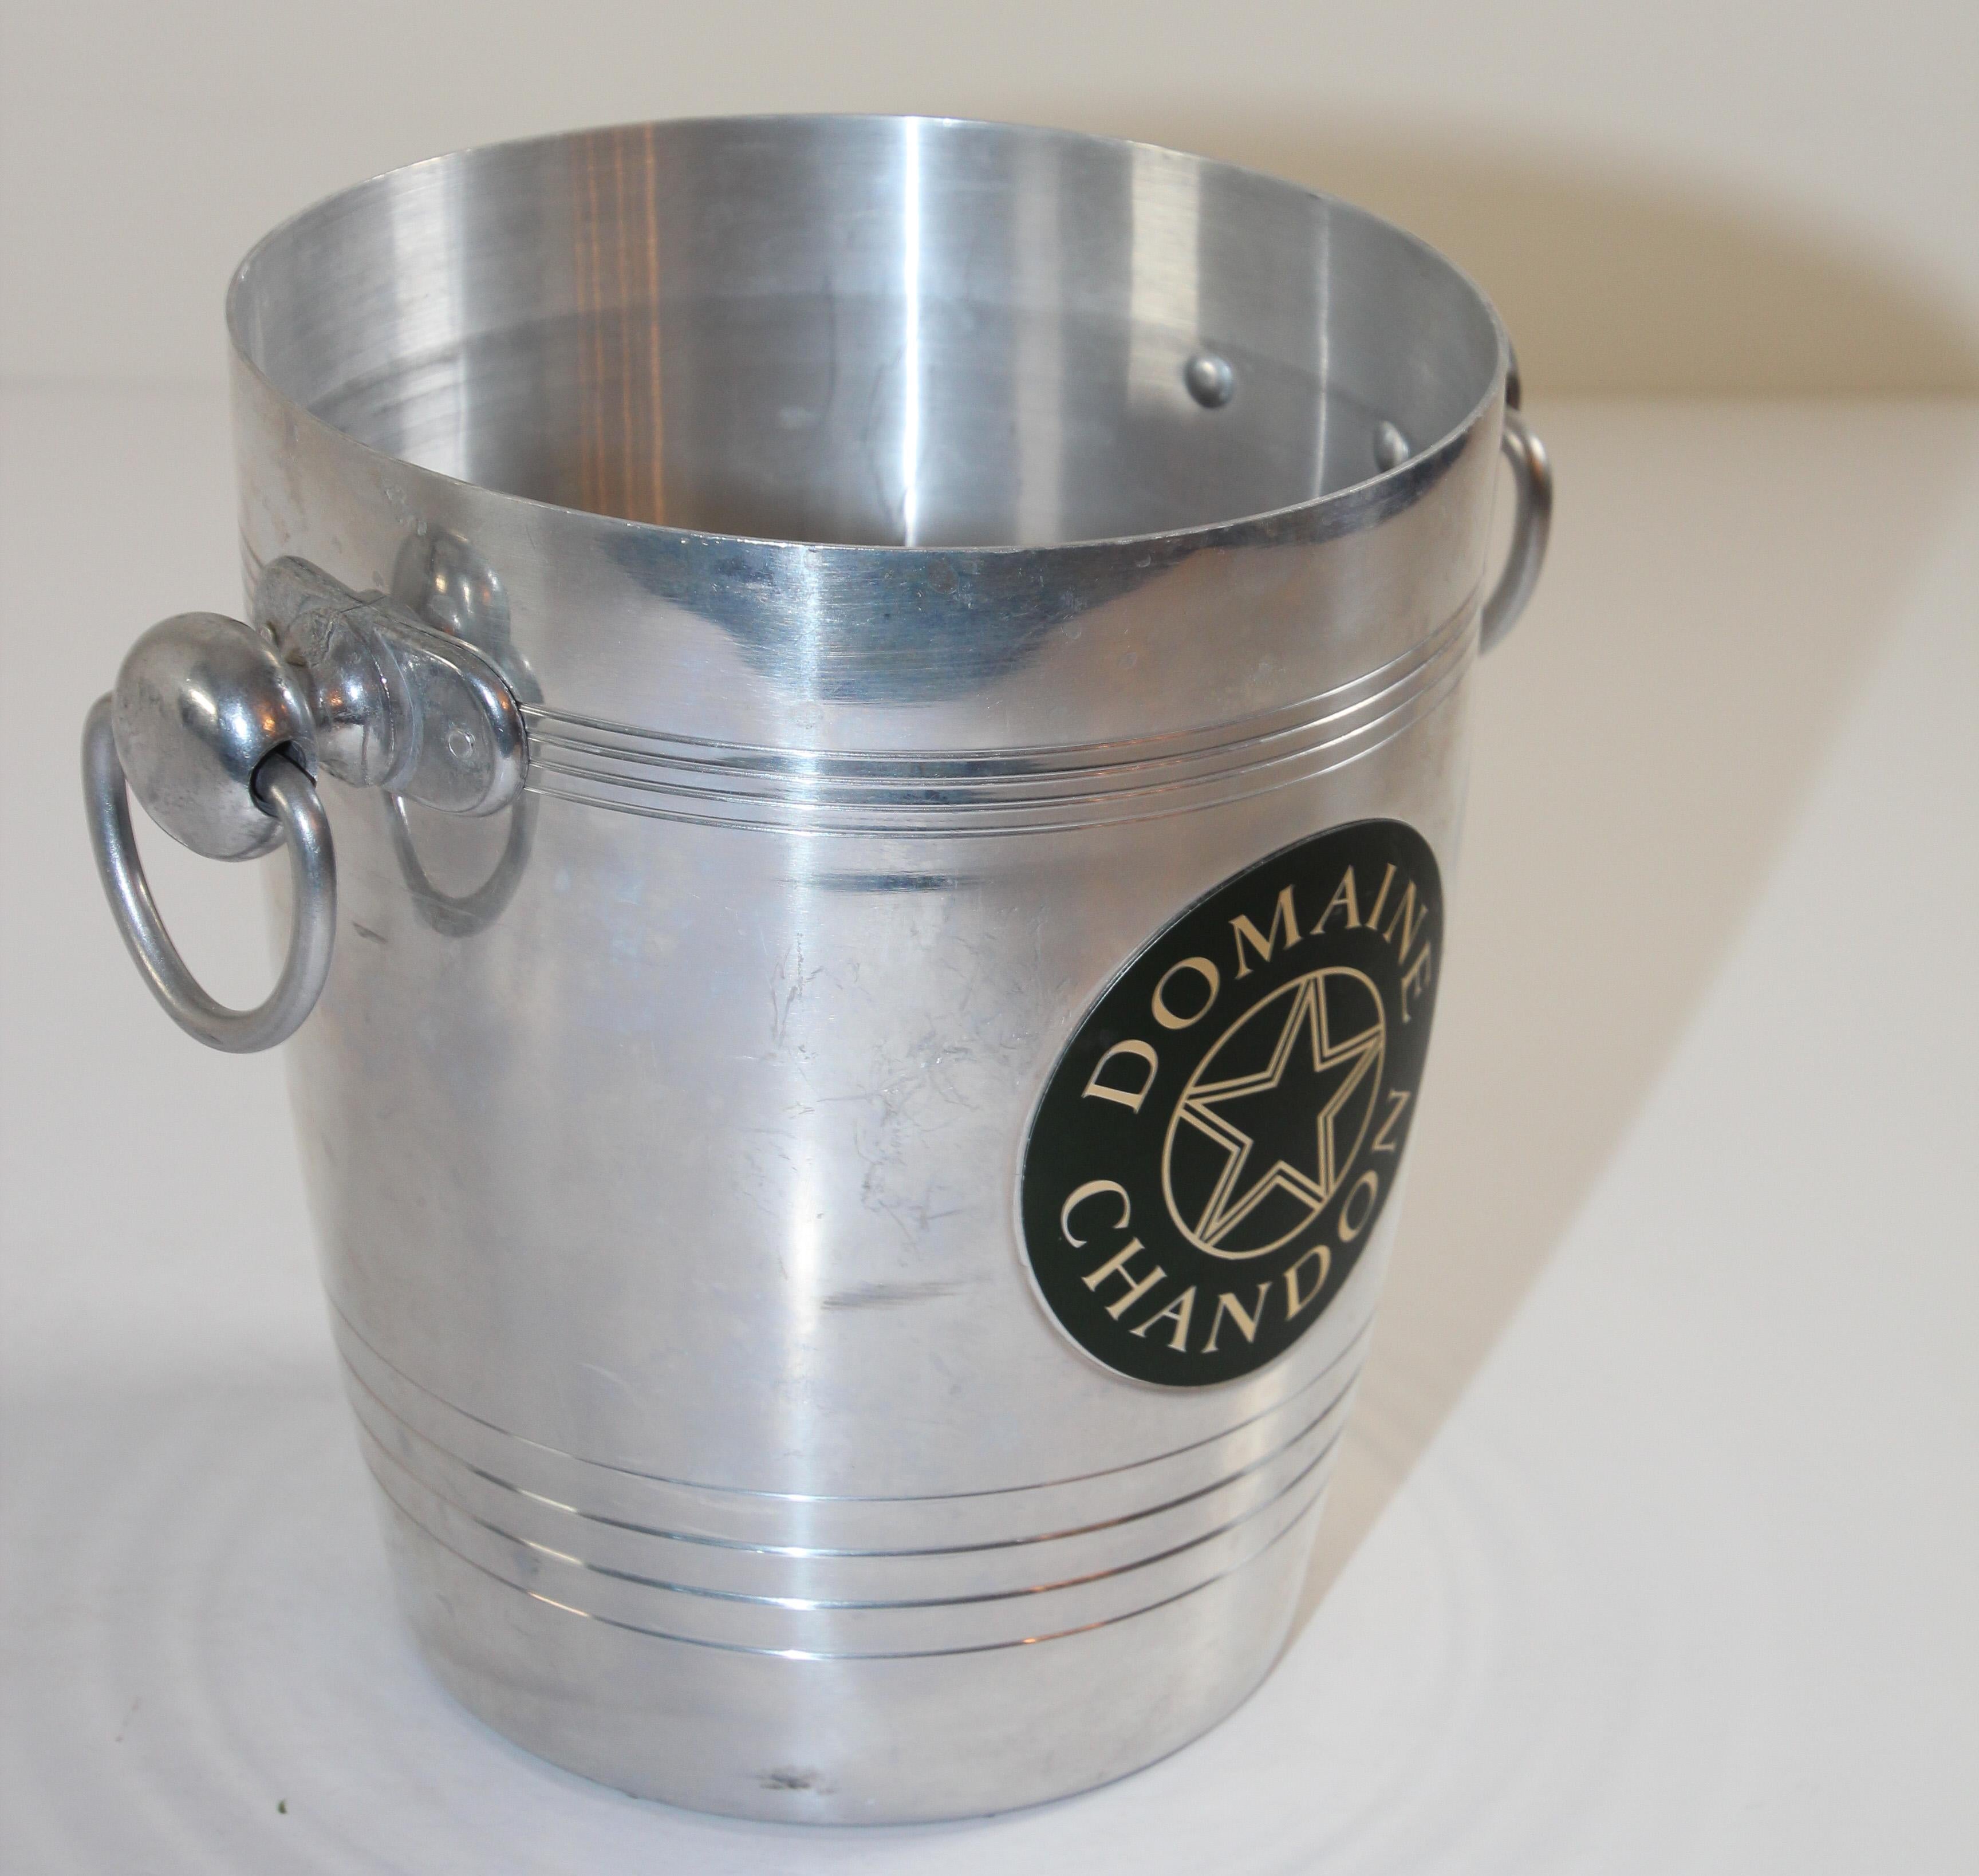 Cold-Painted French Vintage Domaine Chandon Champagne Ice Bucket Cooler